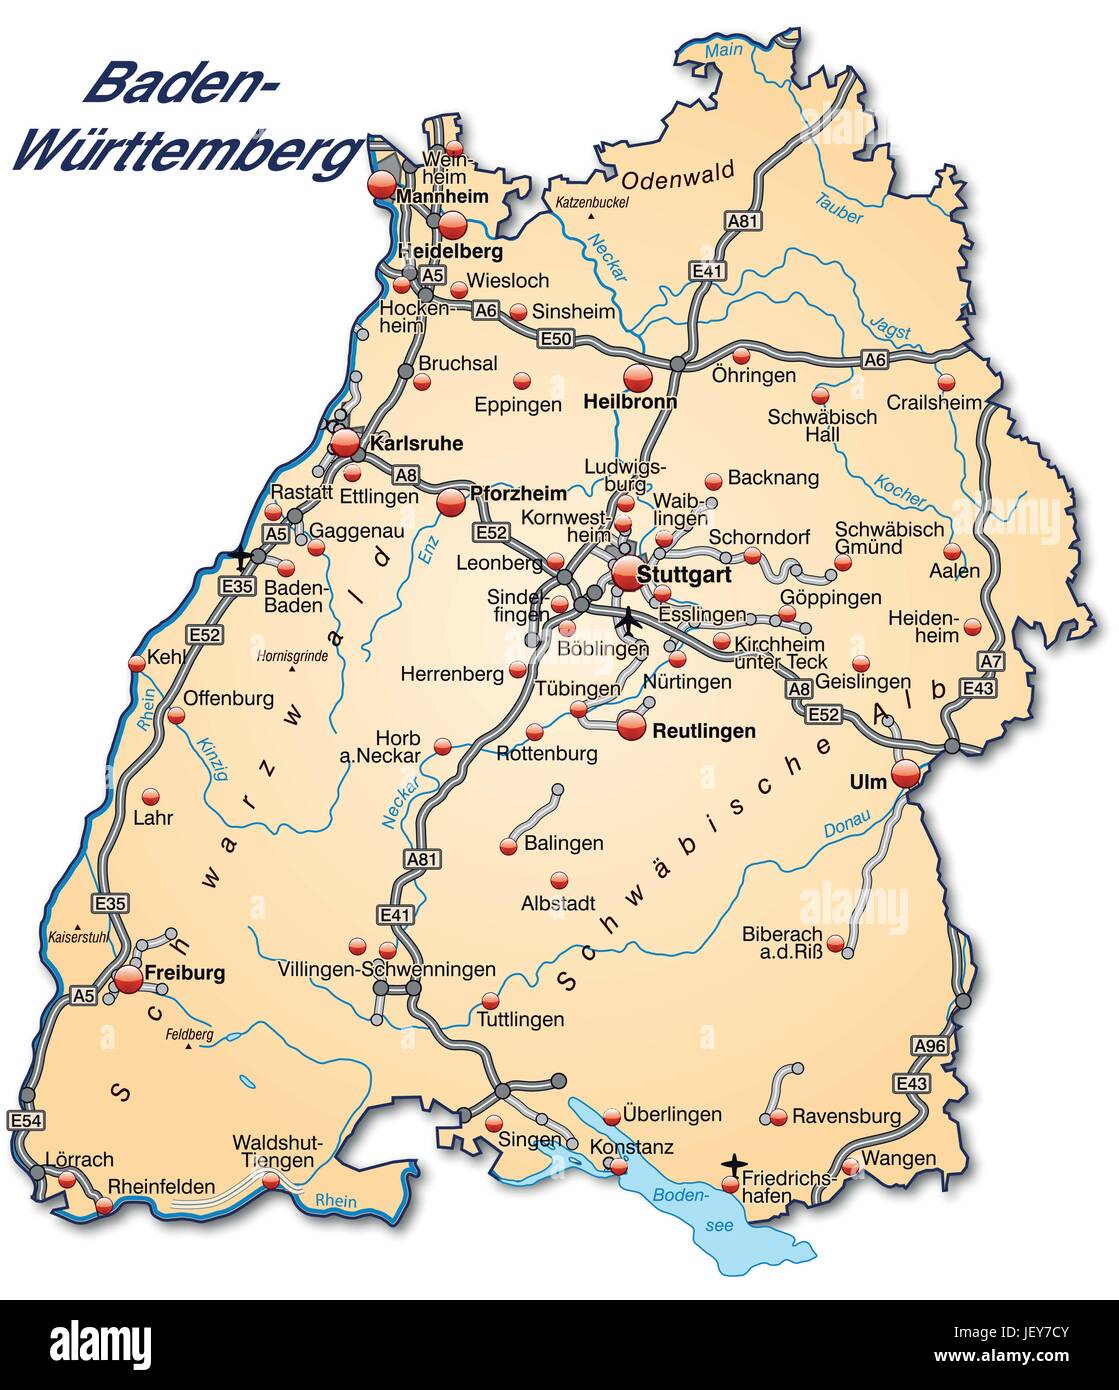 Map Of Baden Wuerttemberg With Transport Network In Pastel Orange JEY7CY 